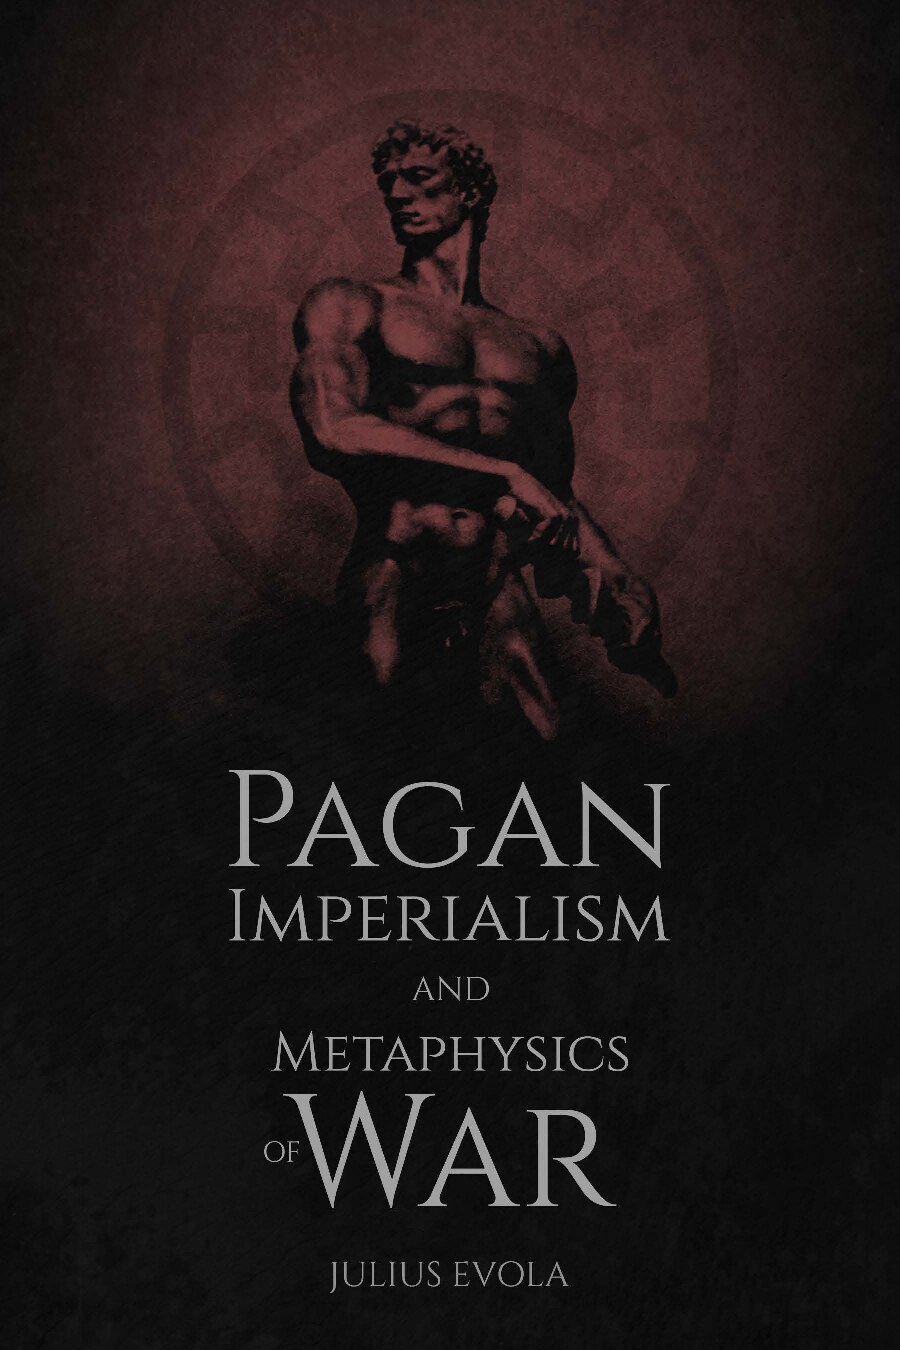 Pagan Imperialism and Metaphysics of War